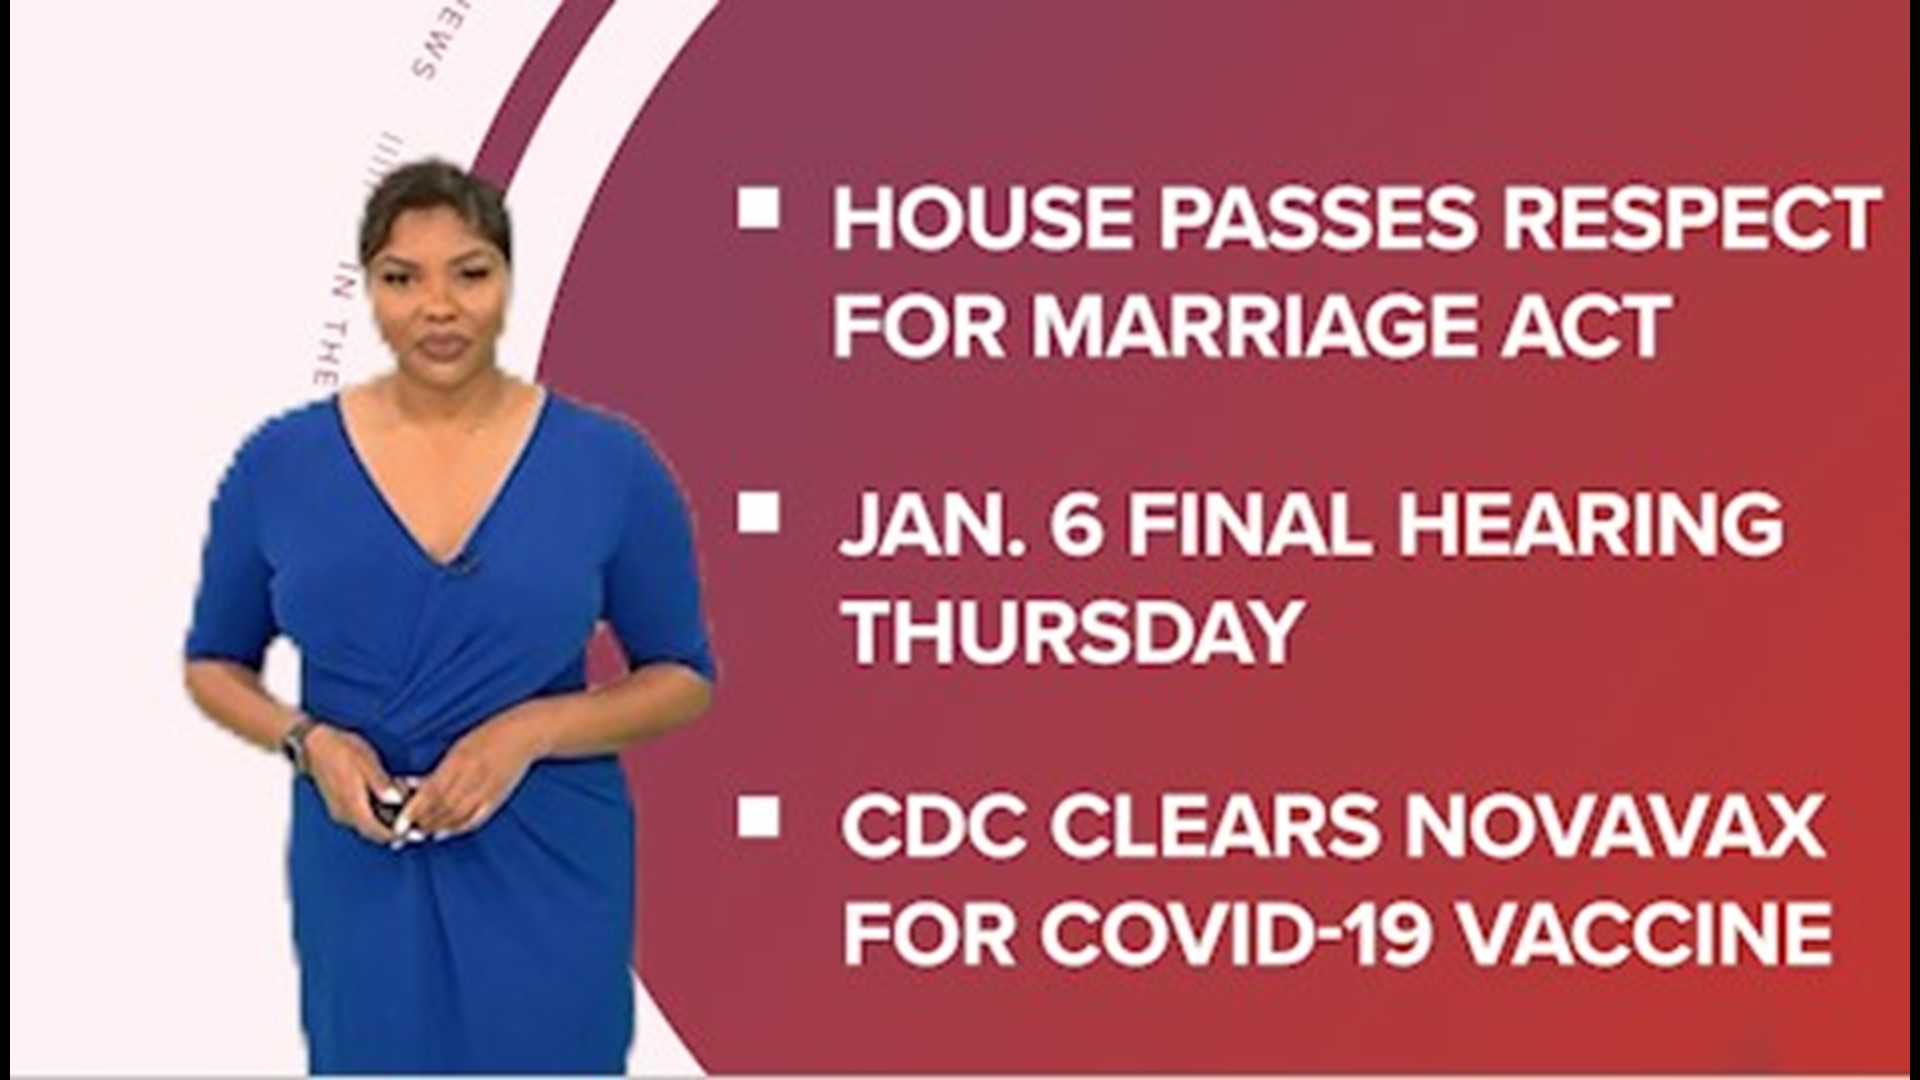 A look at what is happening across the U.S. from "Respect for Marriage" bill to final Jan. 6 hearing and a new Covid-19 vaccine